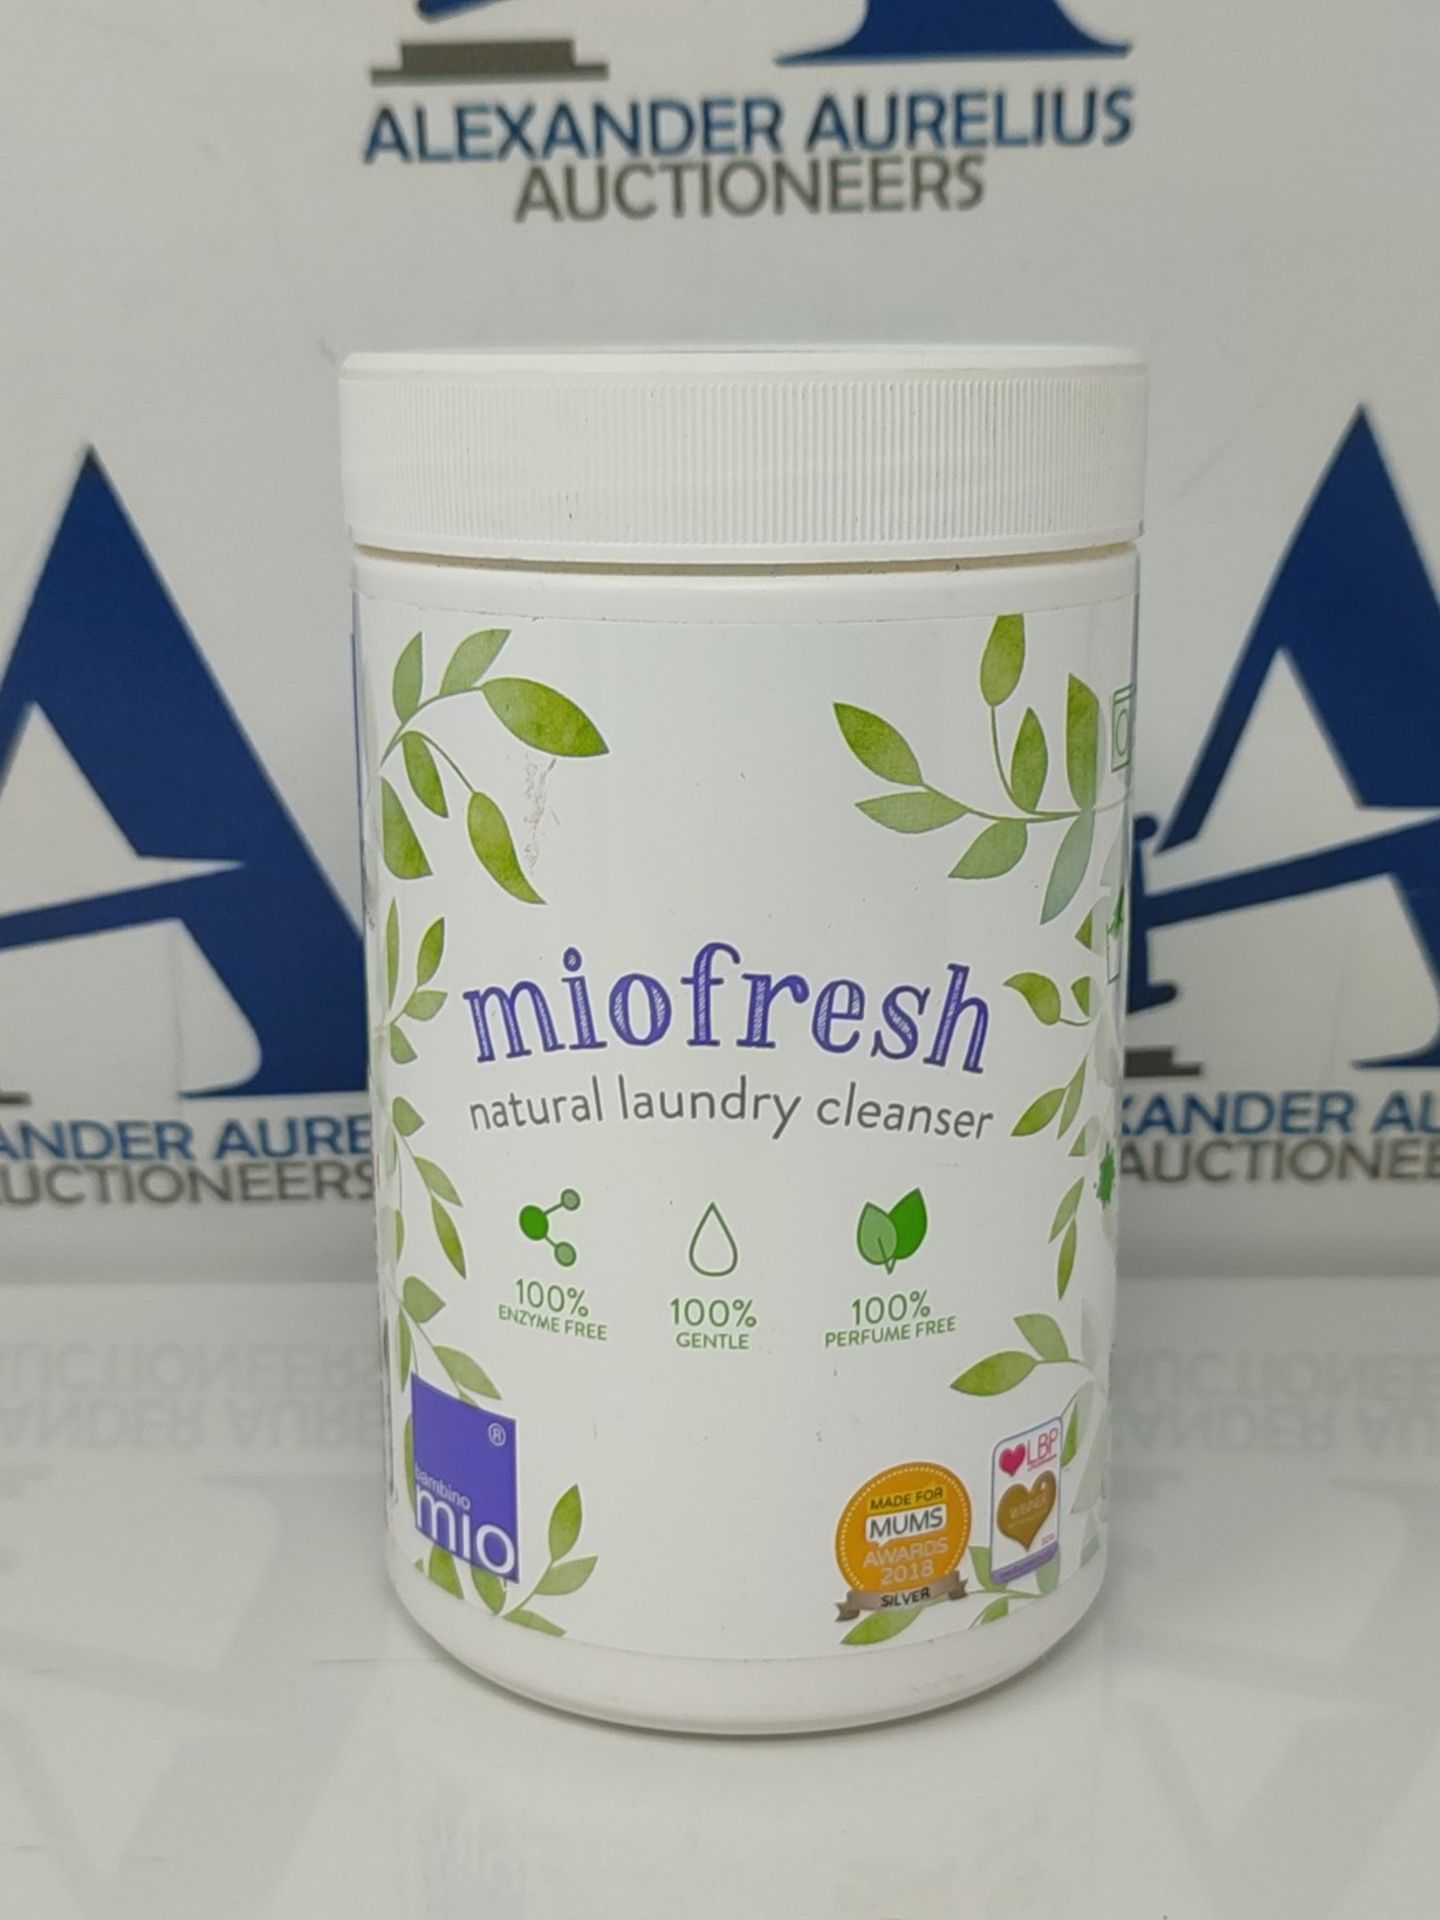 Bambino Mio Miofresh Natural Nappy Cleanser, 750g - Image 2 of 2